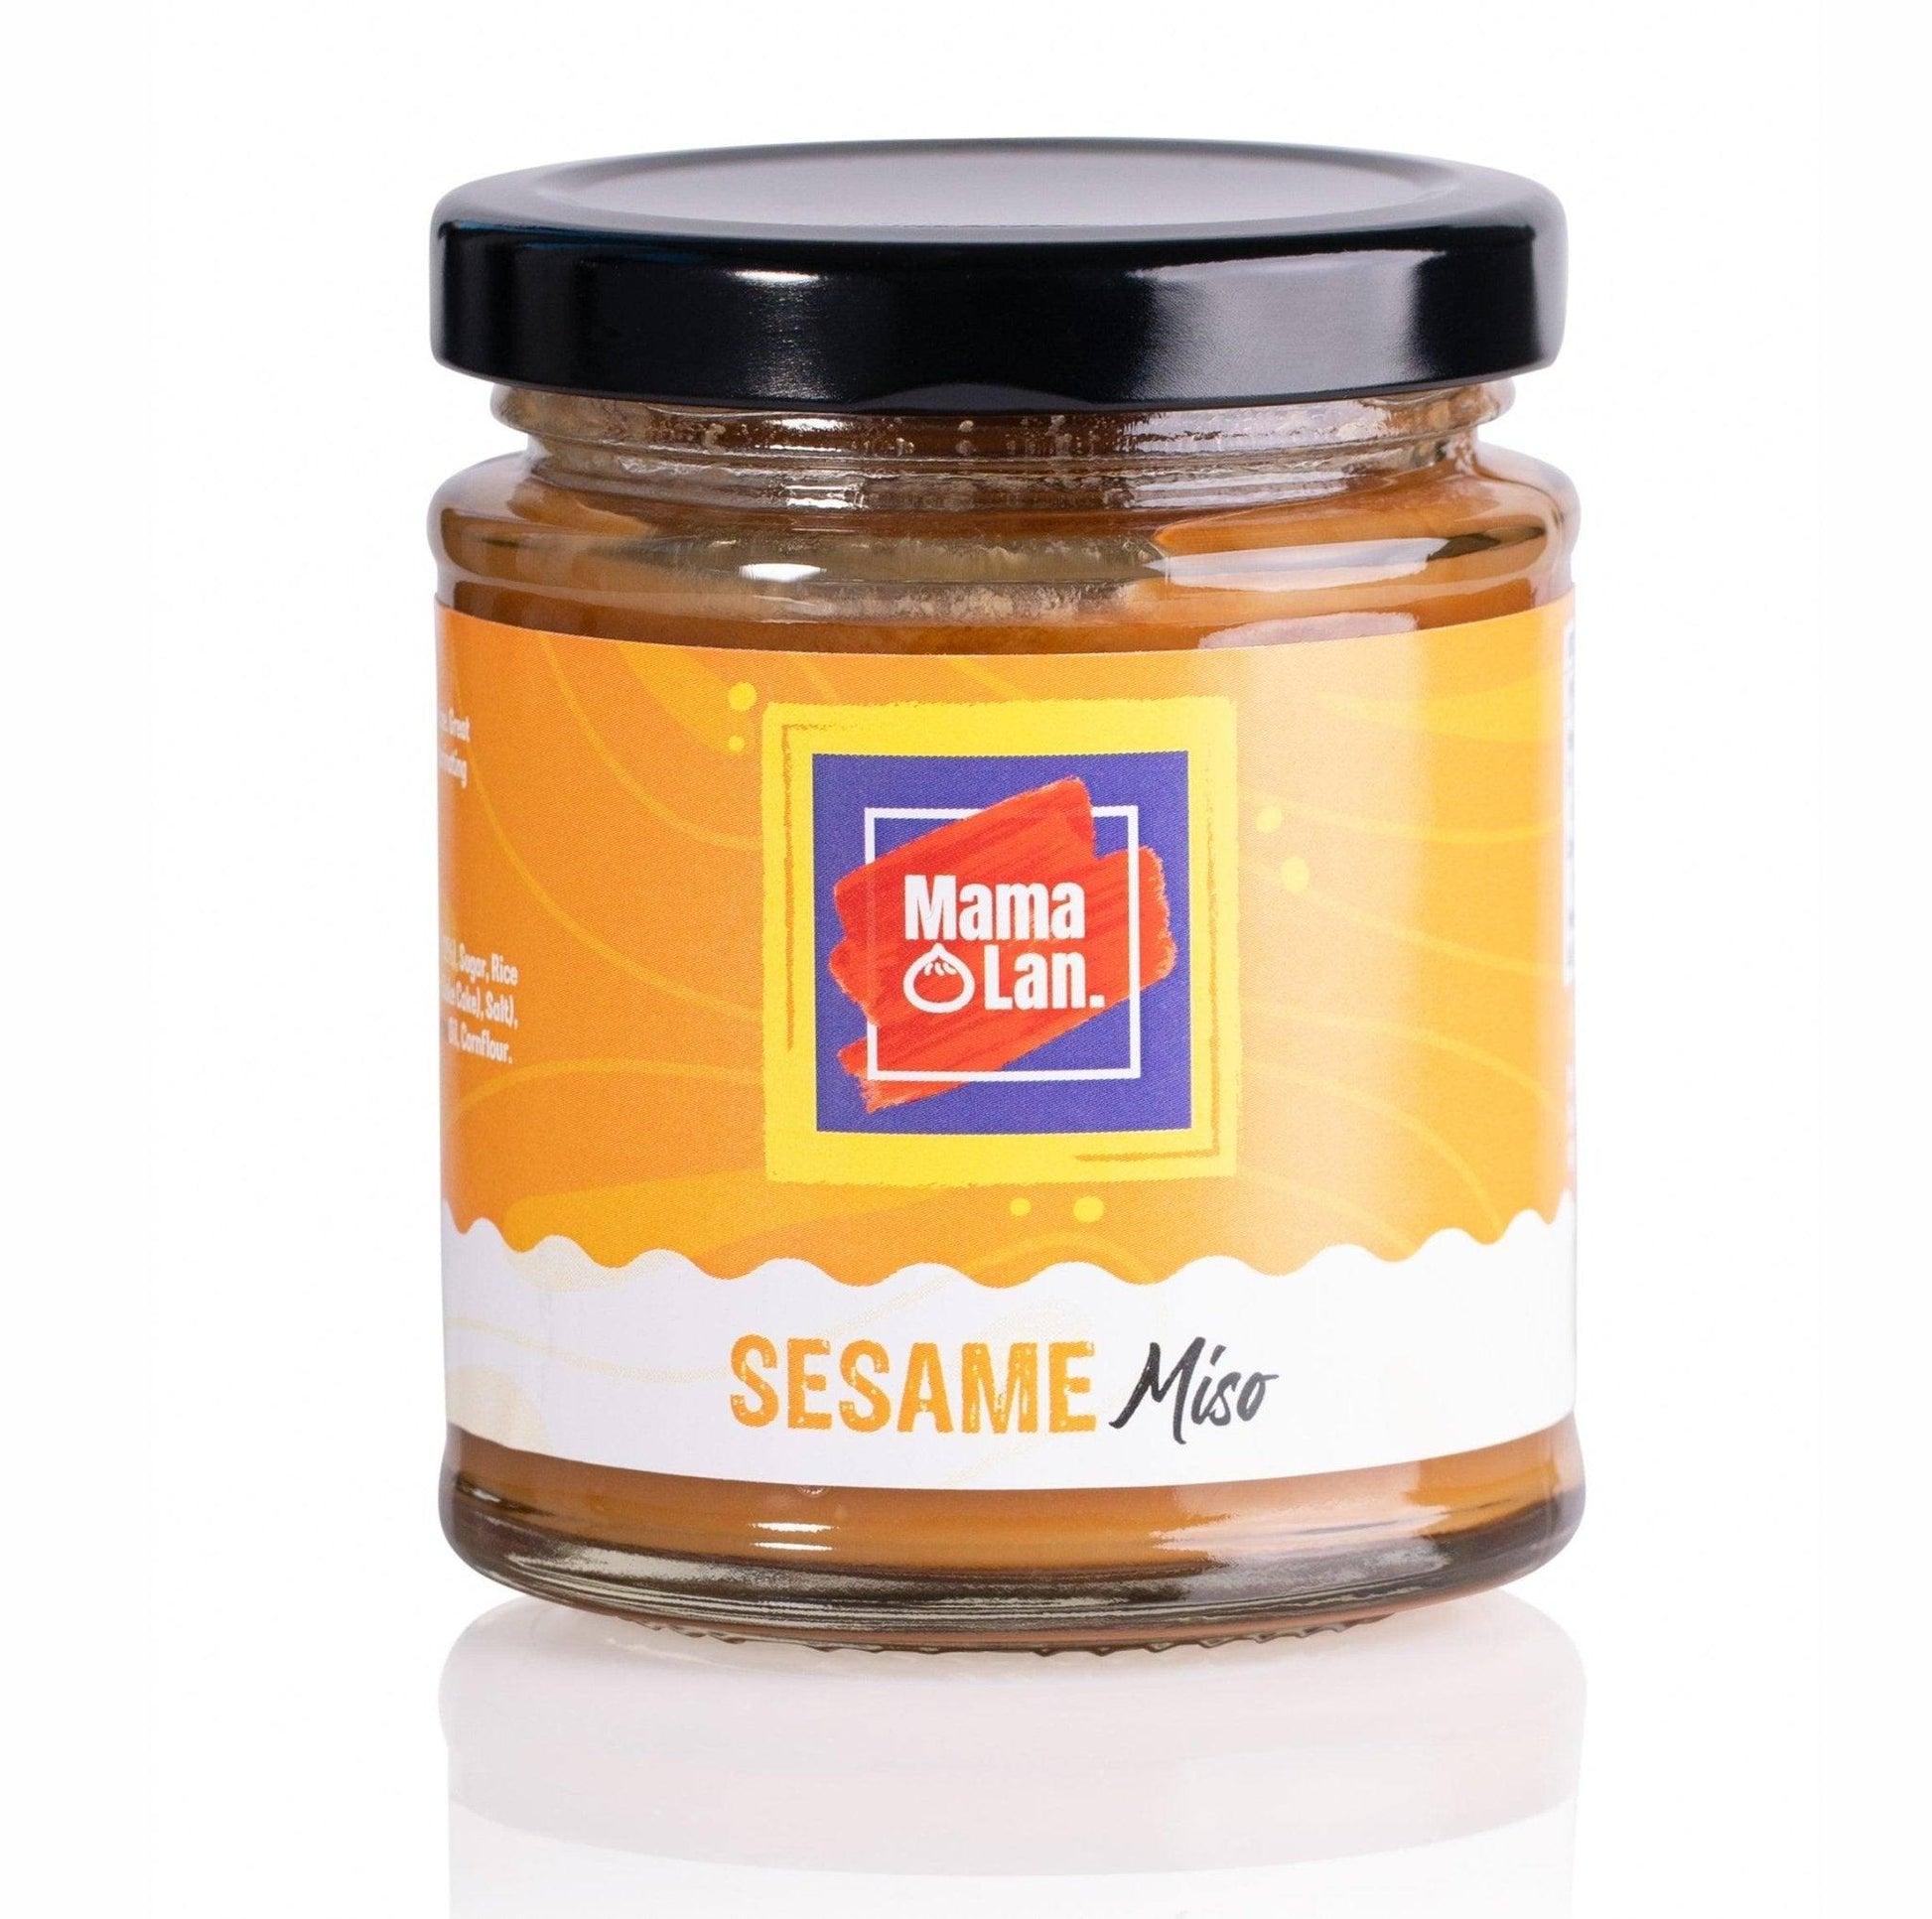 Sesame Miso | 190ml | MamaLan | All Natural - One Stop Chilli Shop